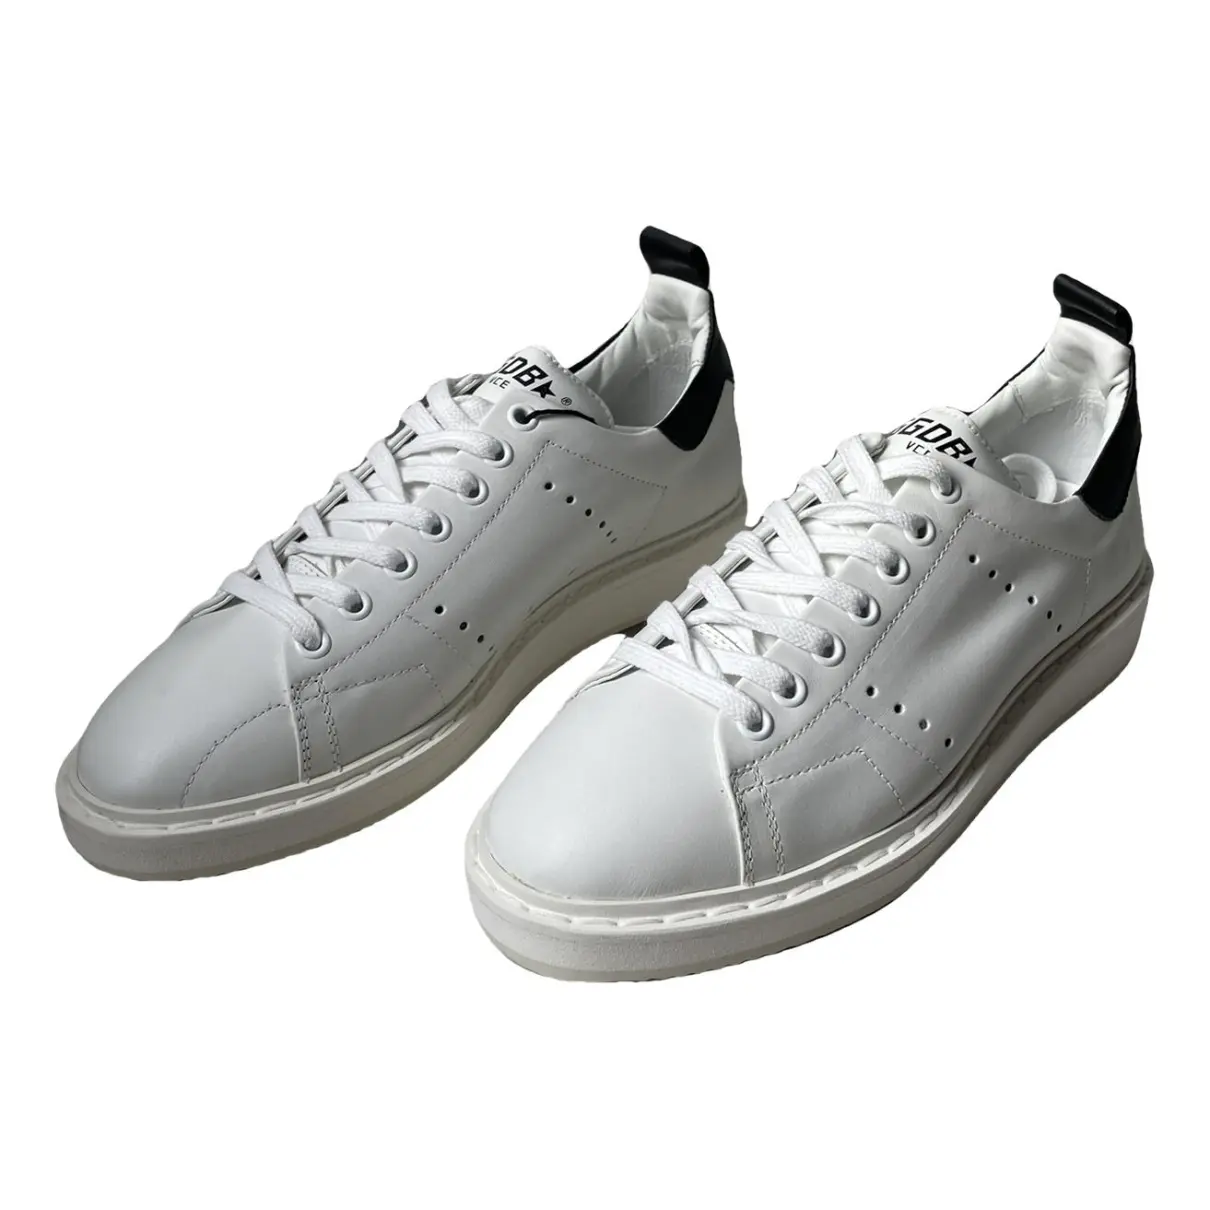 Starter leather trainers Golden Goose White size 38 EU in Leather - 41161768